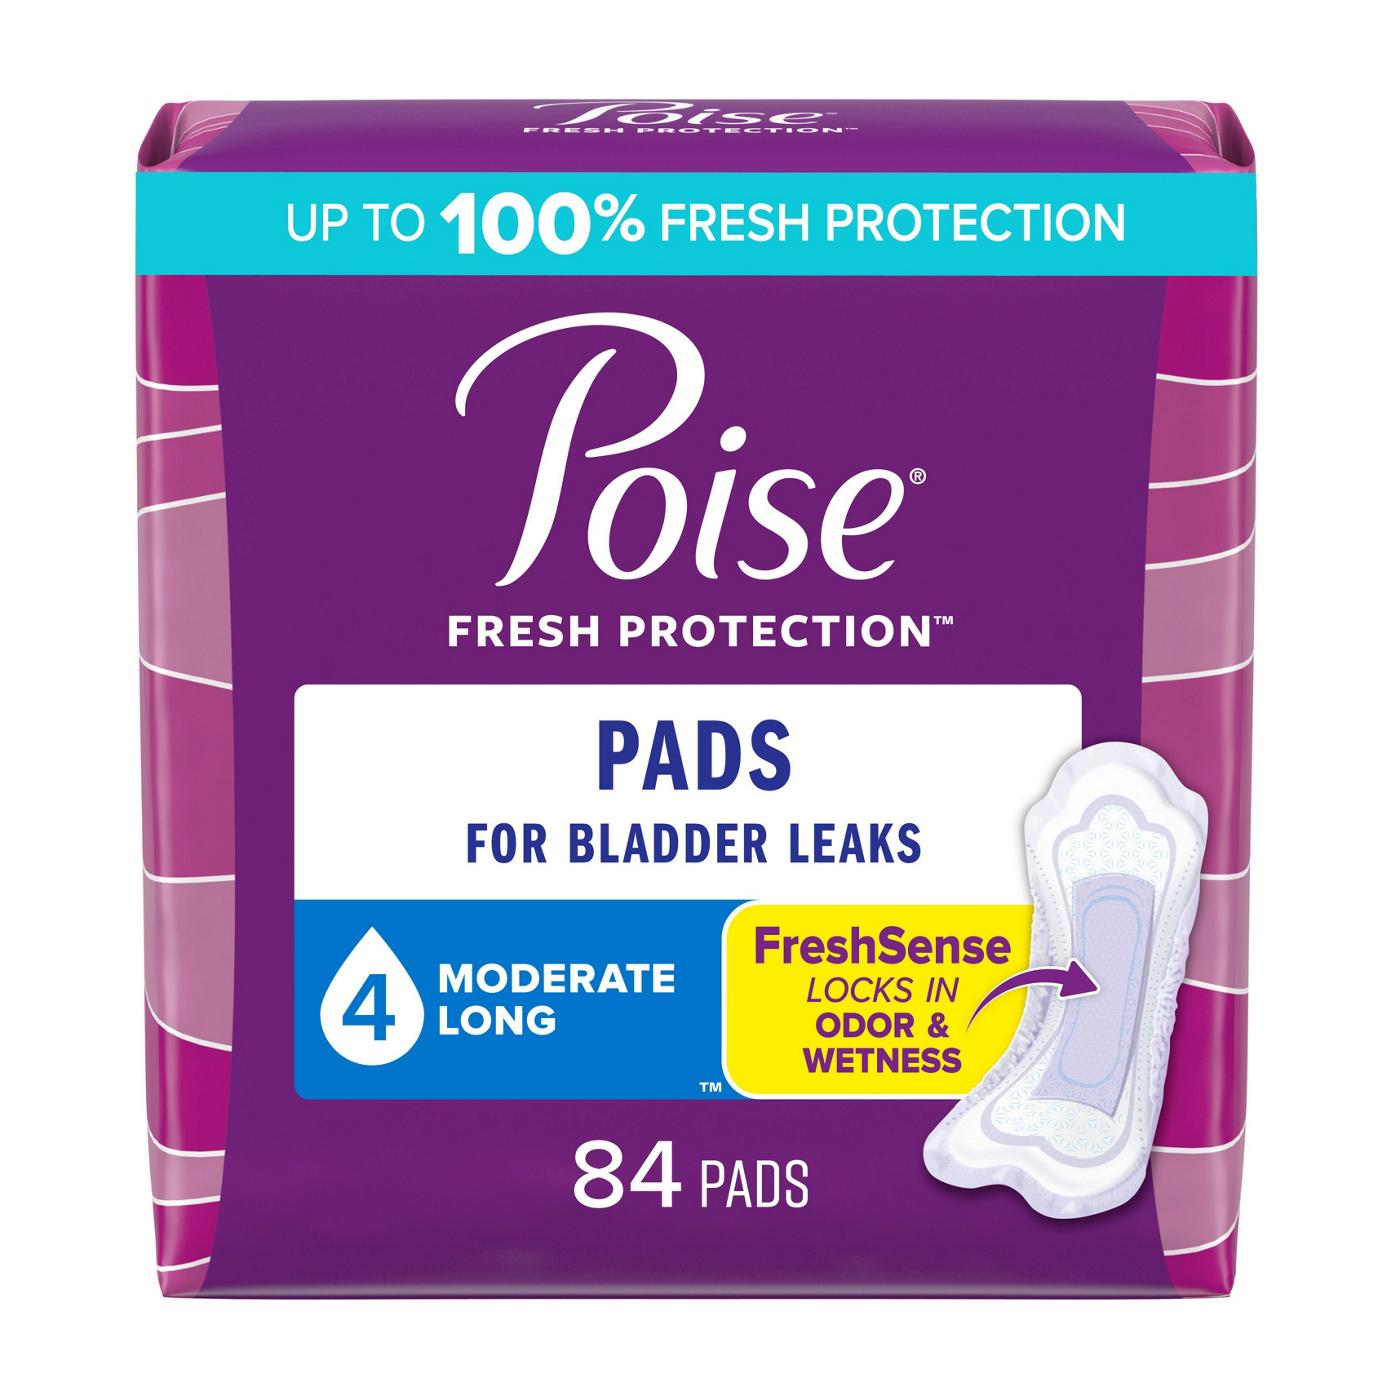 Poise Long Incontinence & Postpartum Pads - 4 Drop Moderate; image 1 of 5